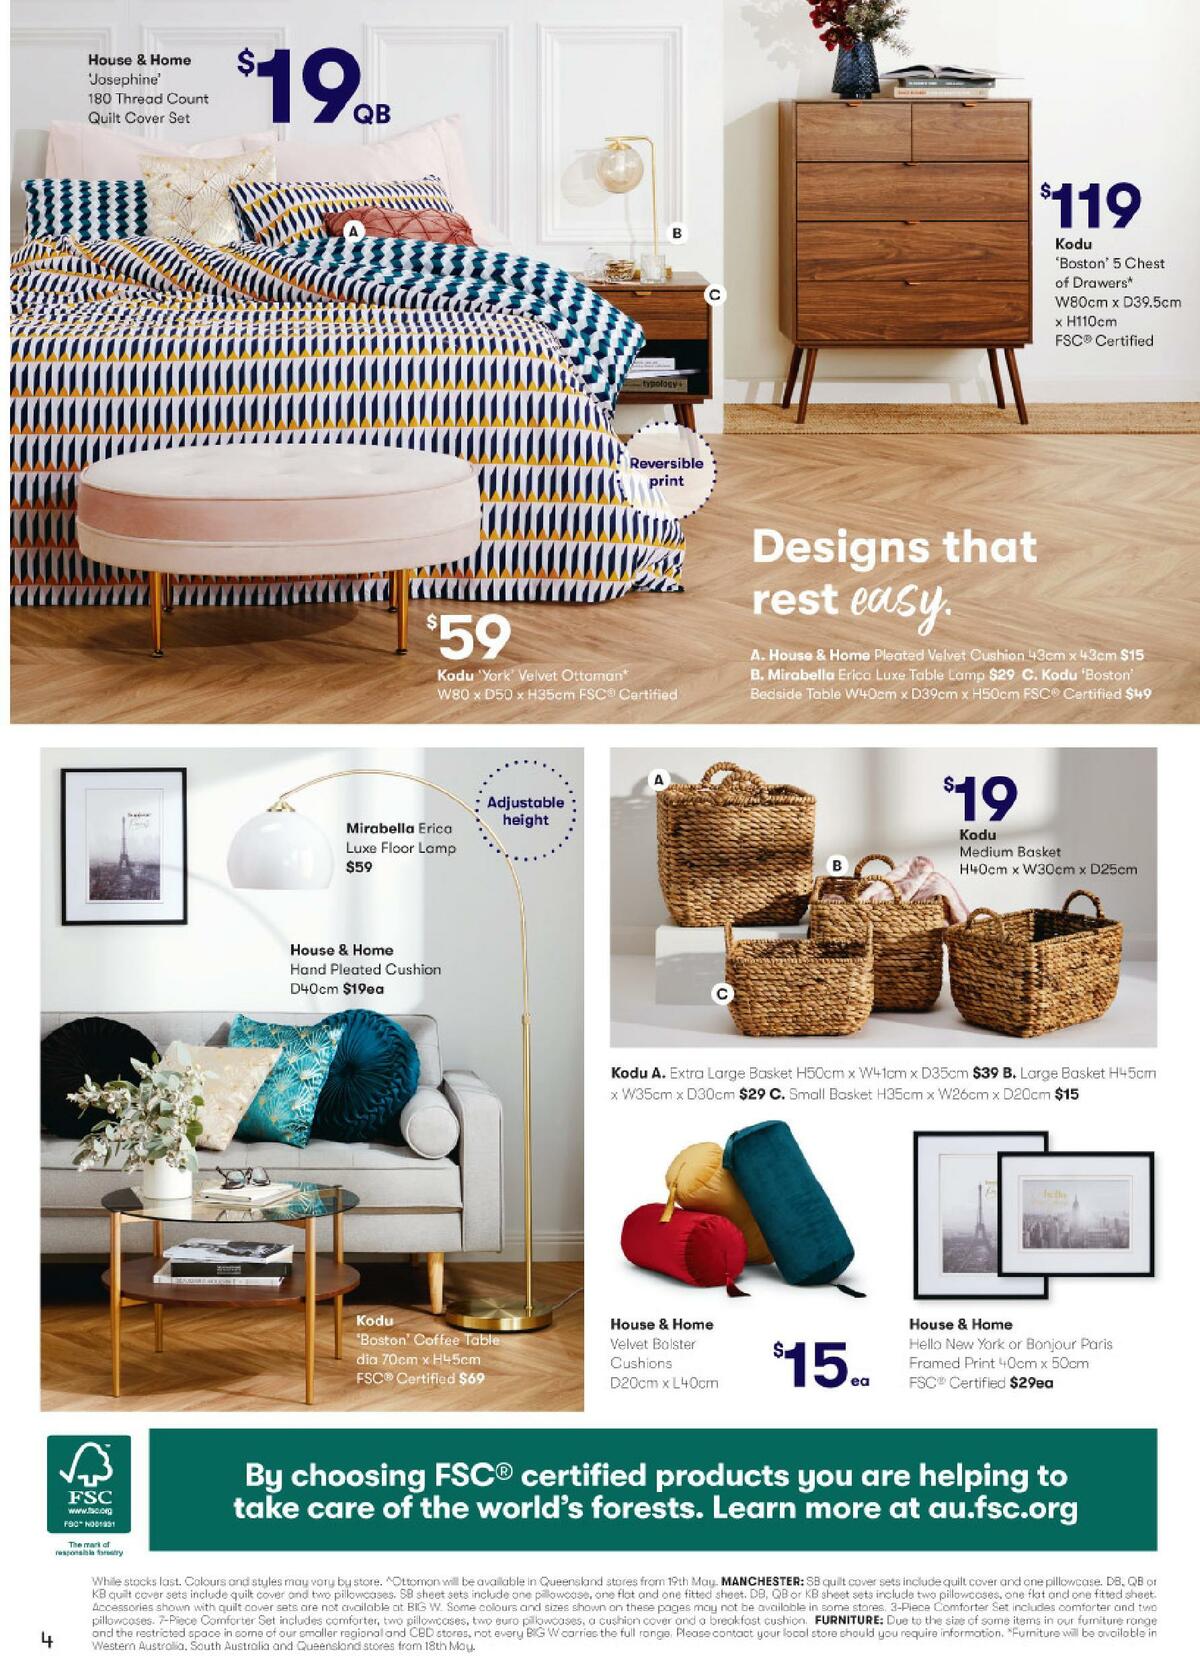 Big W Catalogues from 14 May